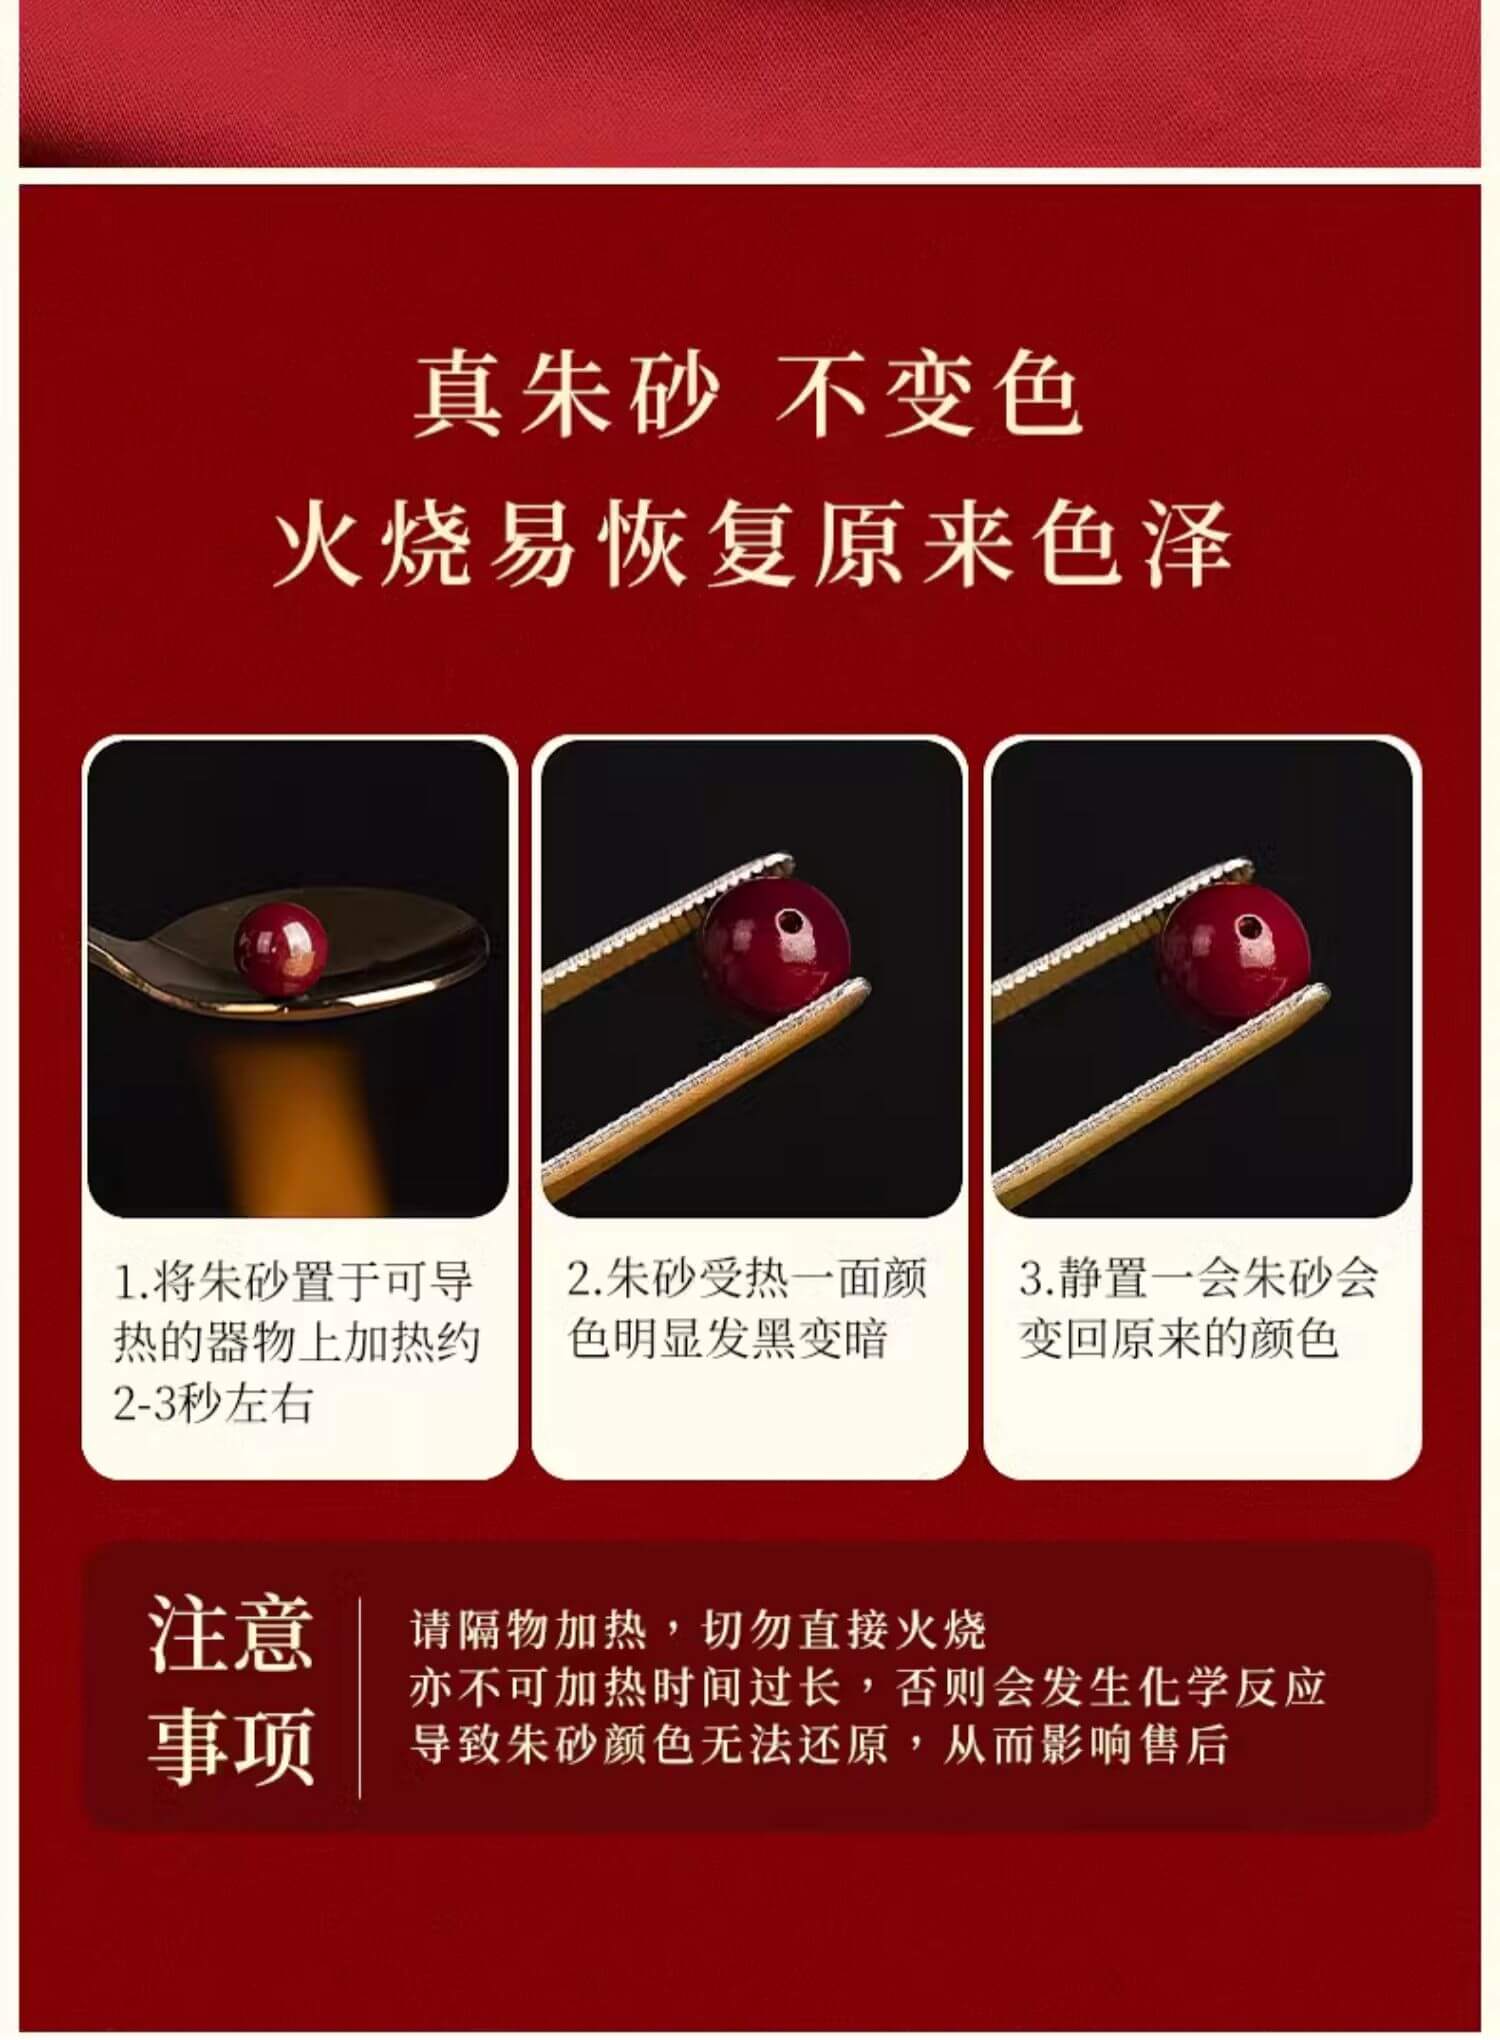 《Good Fortune Year after Year》 Natural Strawberry Crystal Cinnabar Bracelet